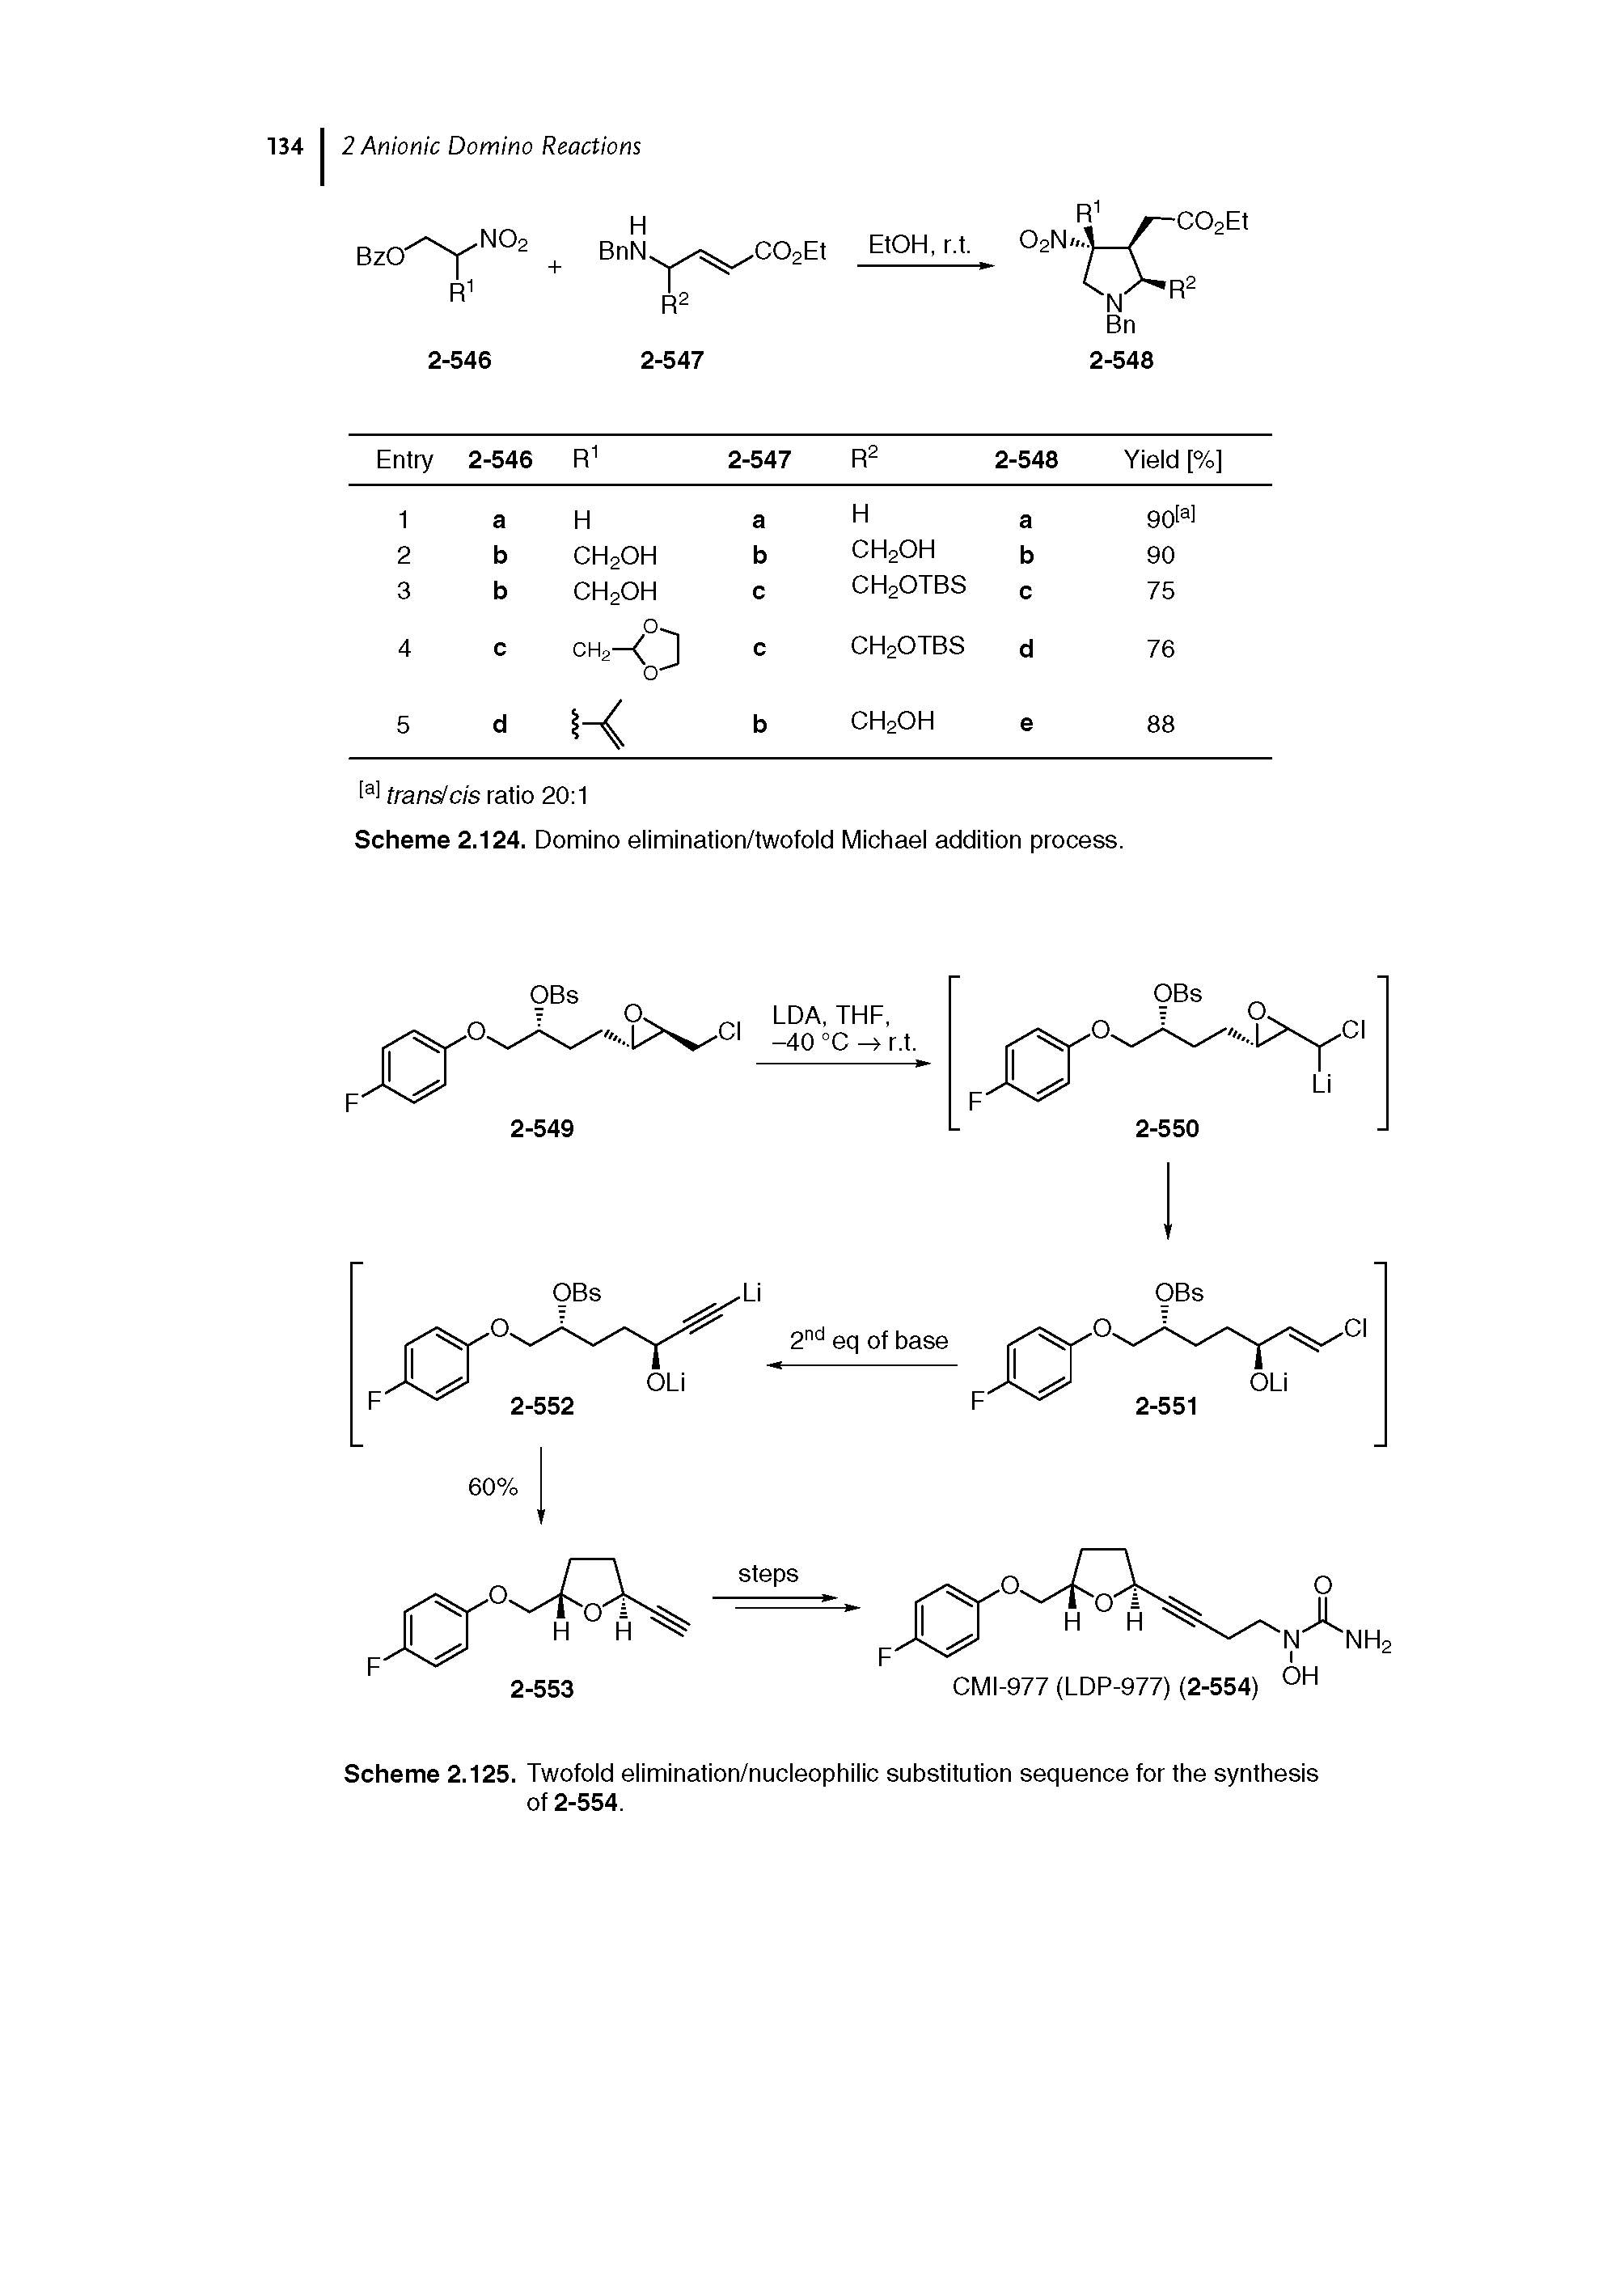 Scheme 2.125. Twofold elimination/nucleophilic substitution sequence for the synthesis of 2-554.